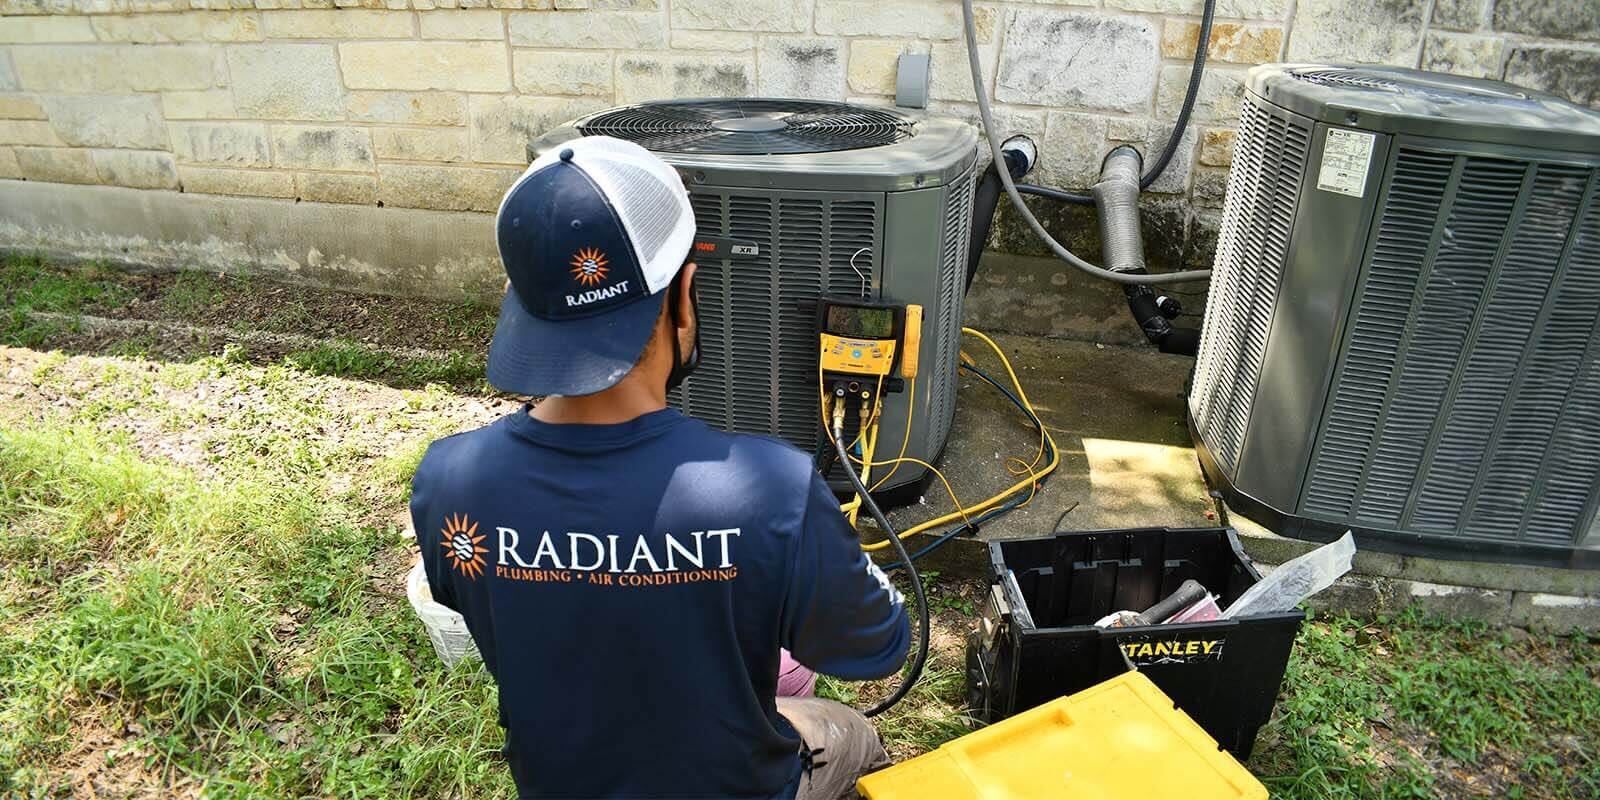 Radiant technician checking an outdoor HVAC unit